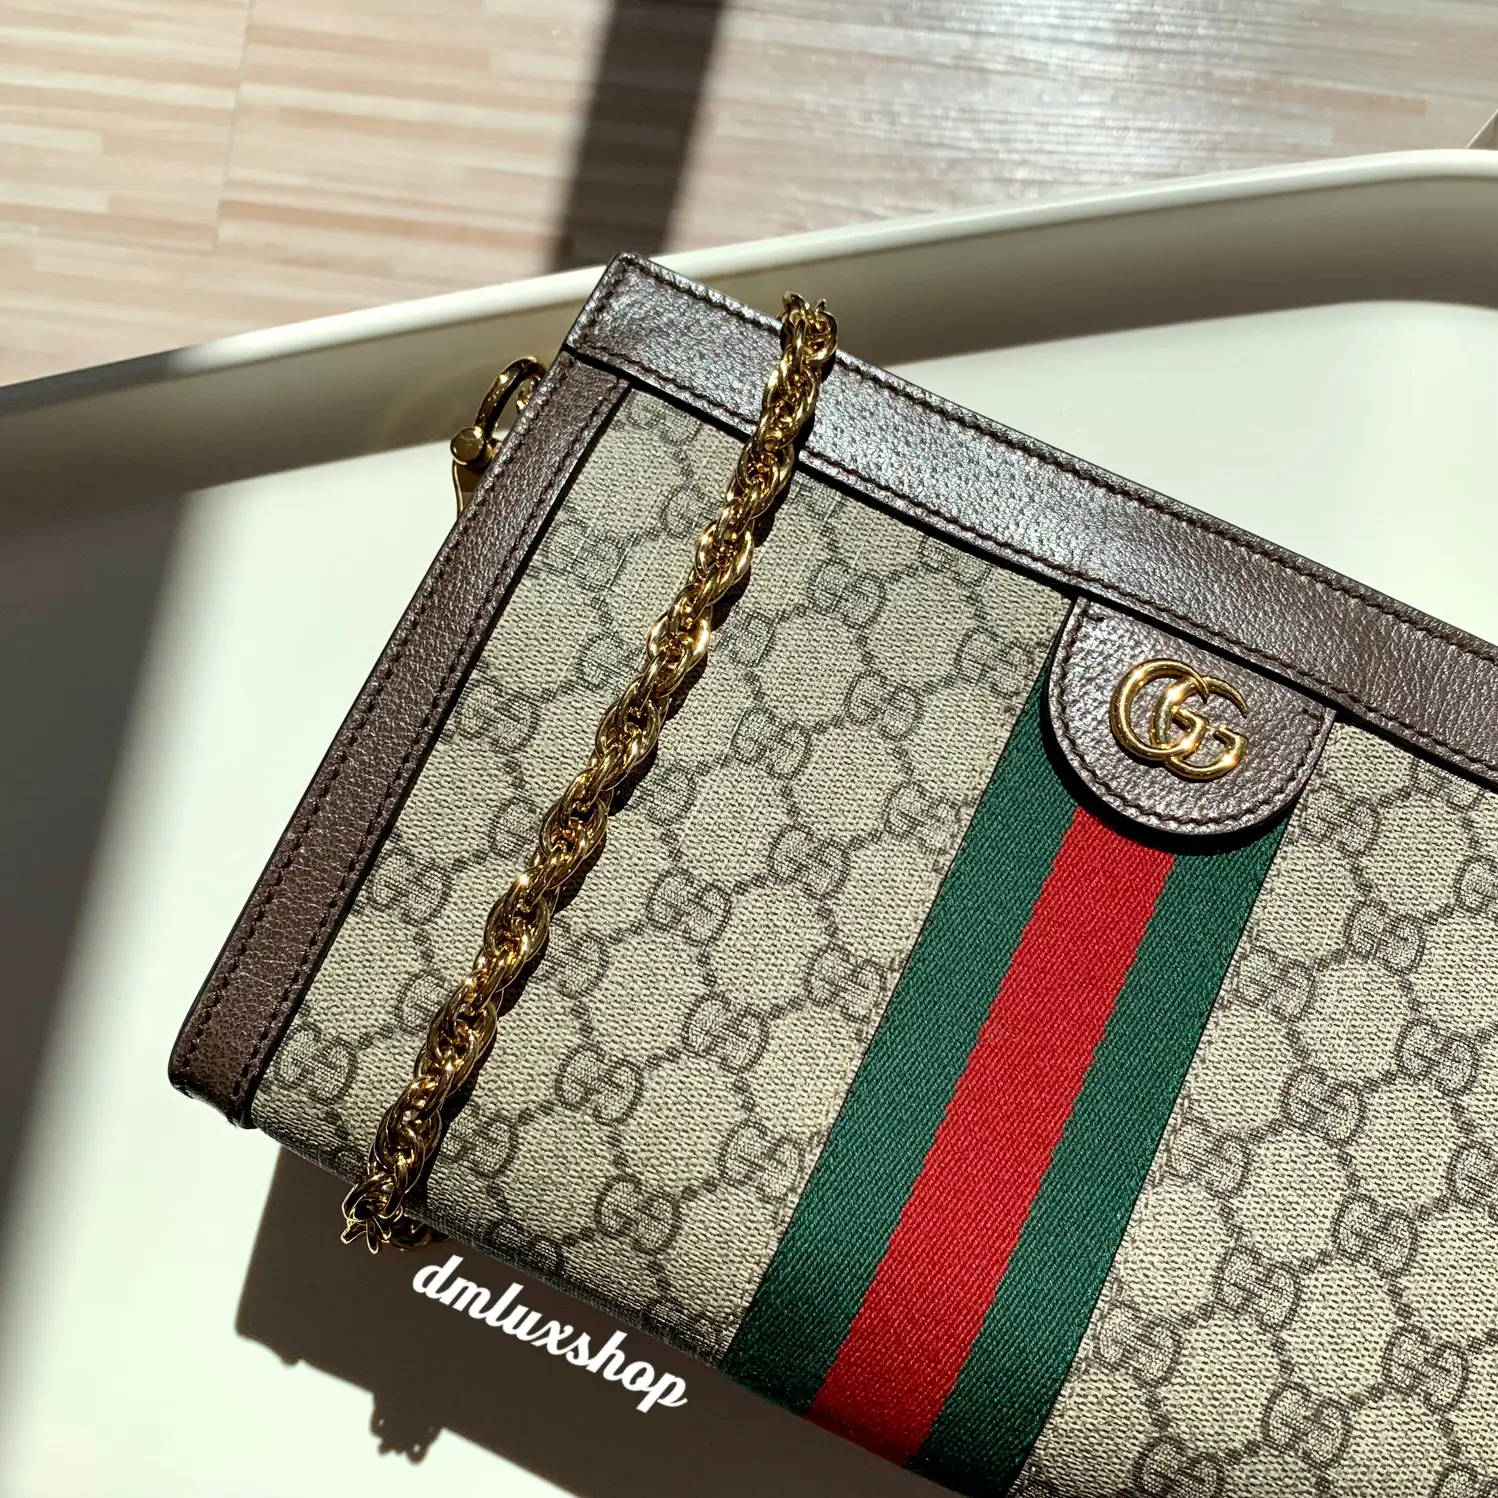 Gucci Ophidia GG shoulder bag review, pros and cons